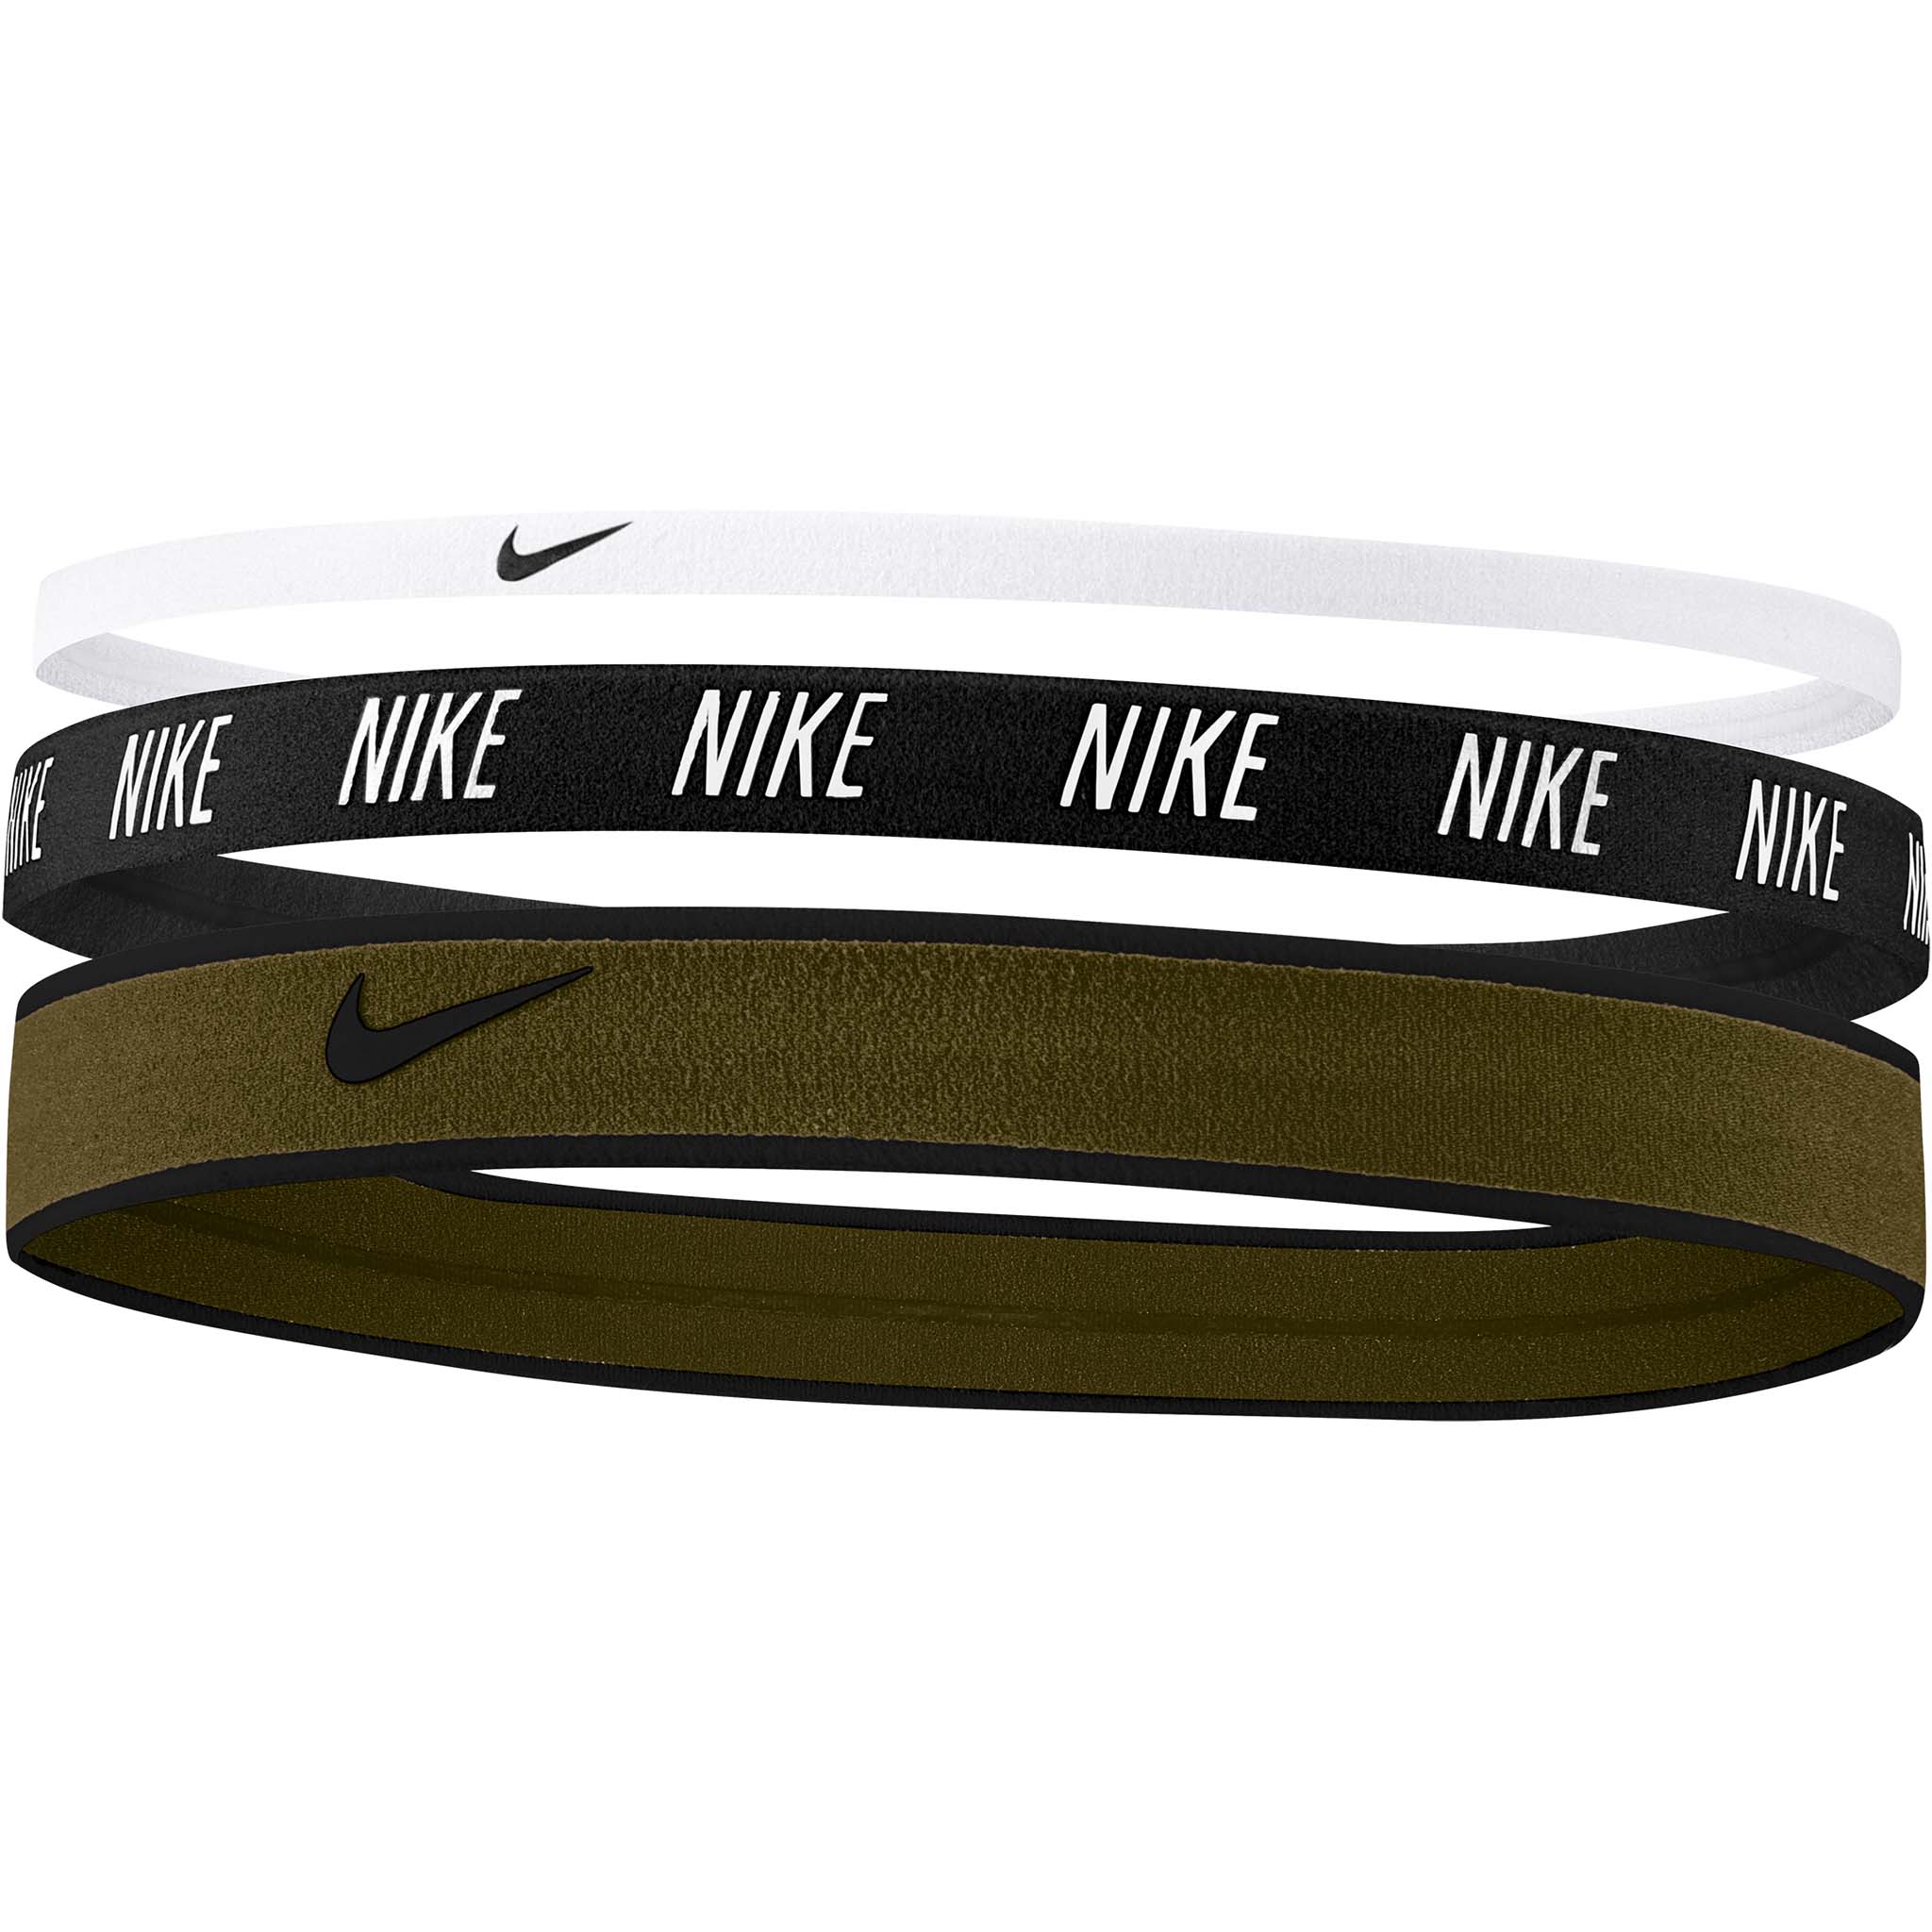 Nike Mixed Width Hairbands 3pk bandeaux sport pour cheveux tailles var -  Soccer Sport Fitness